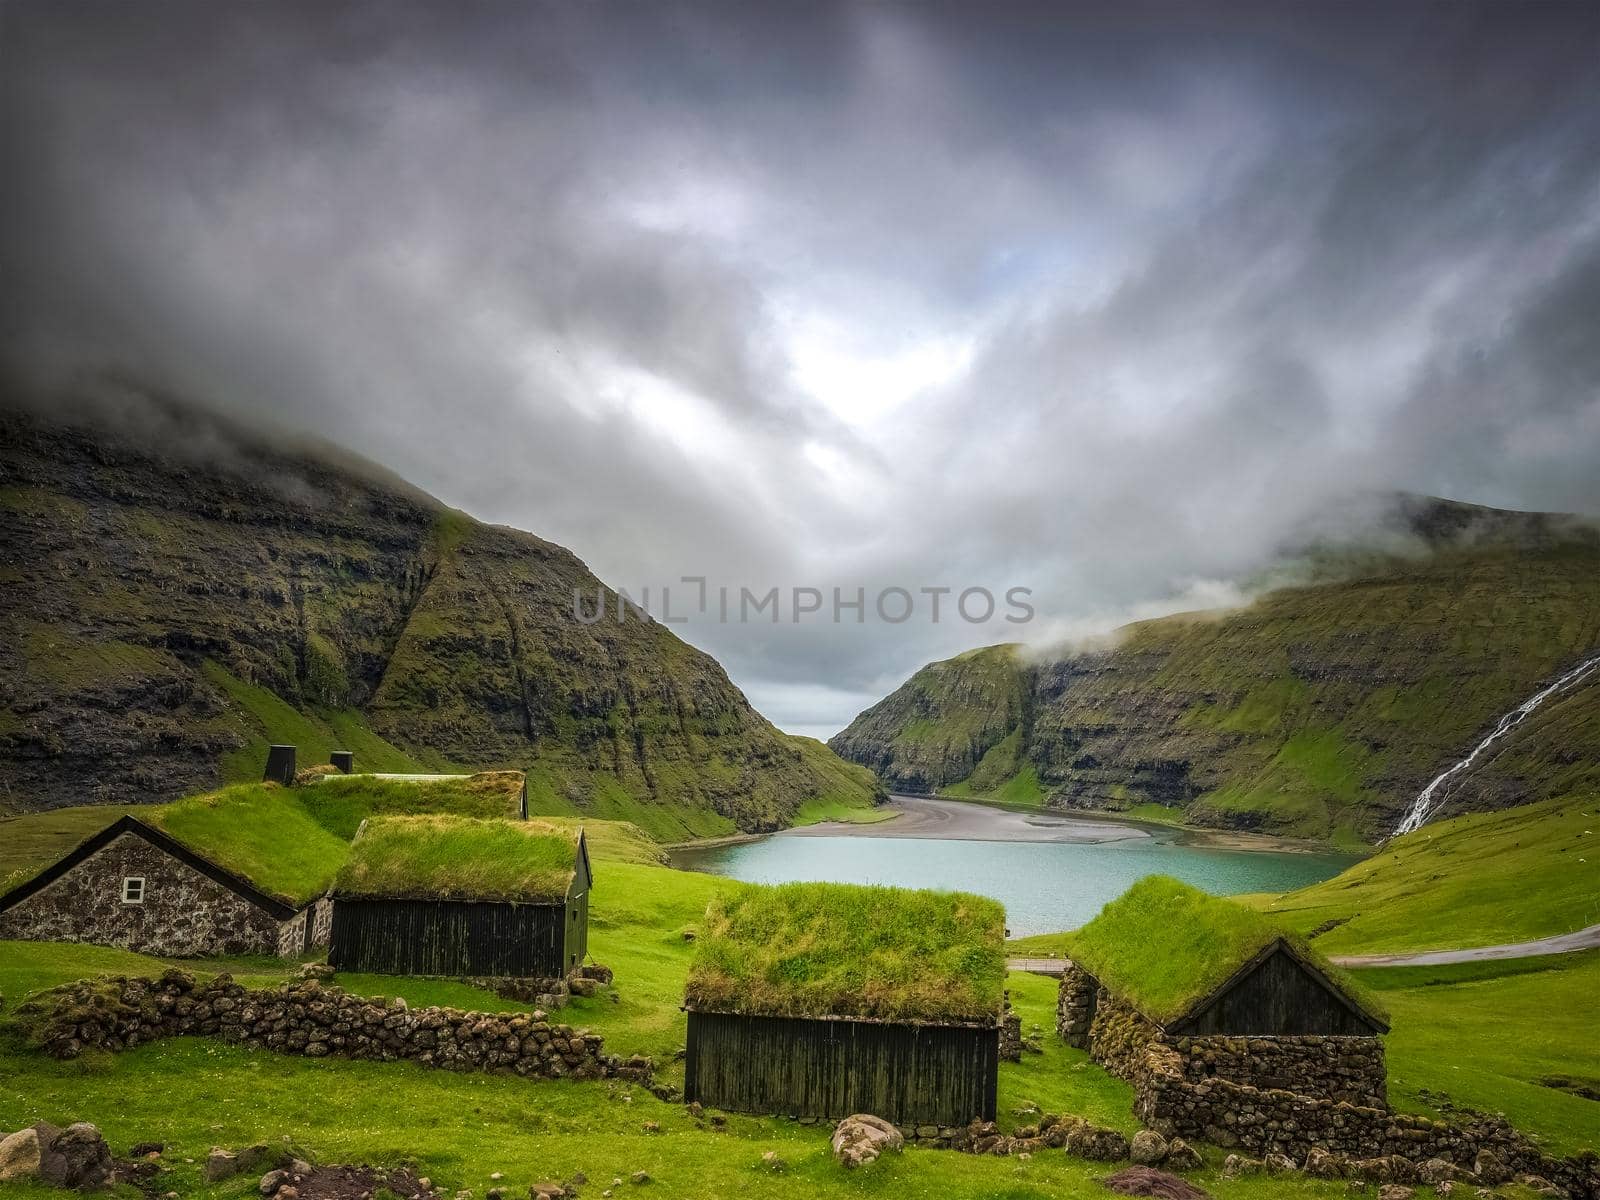 Small houses near a blue lake, a small house made of stones with covered grass on the shore of a beautiful lake by isaiphoto